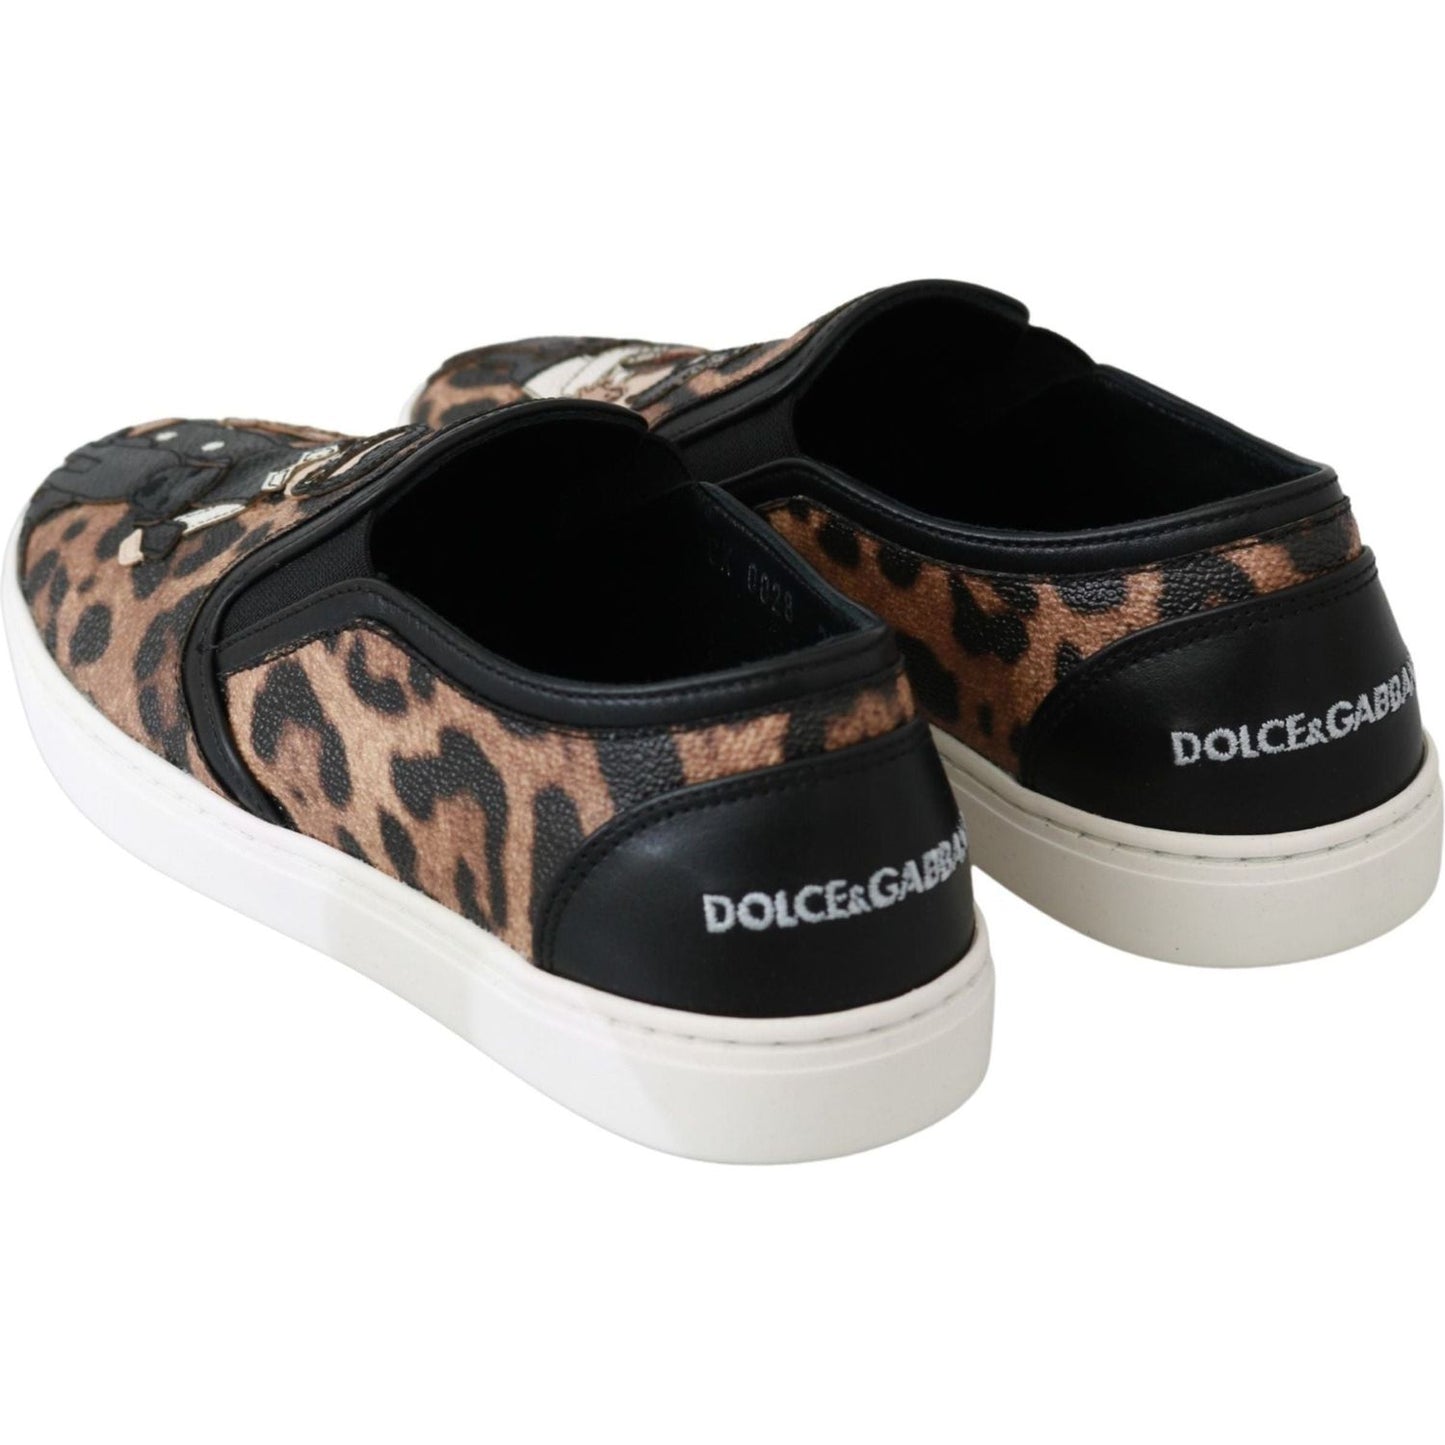 Dolce & Gabbana Chic Leopard Print Loafers for Elegant Comfort leather-leopard-dgfamily-loafers-shoes